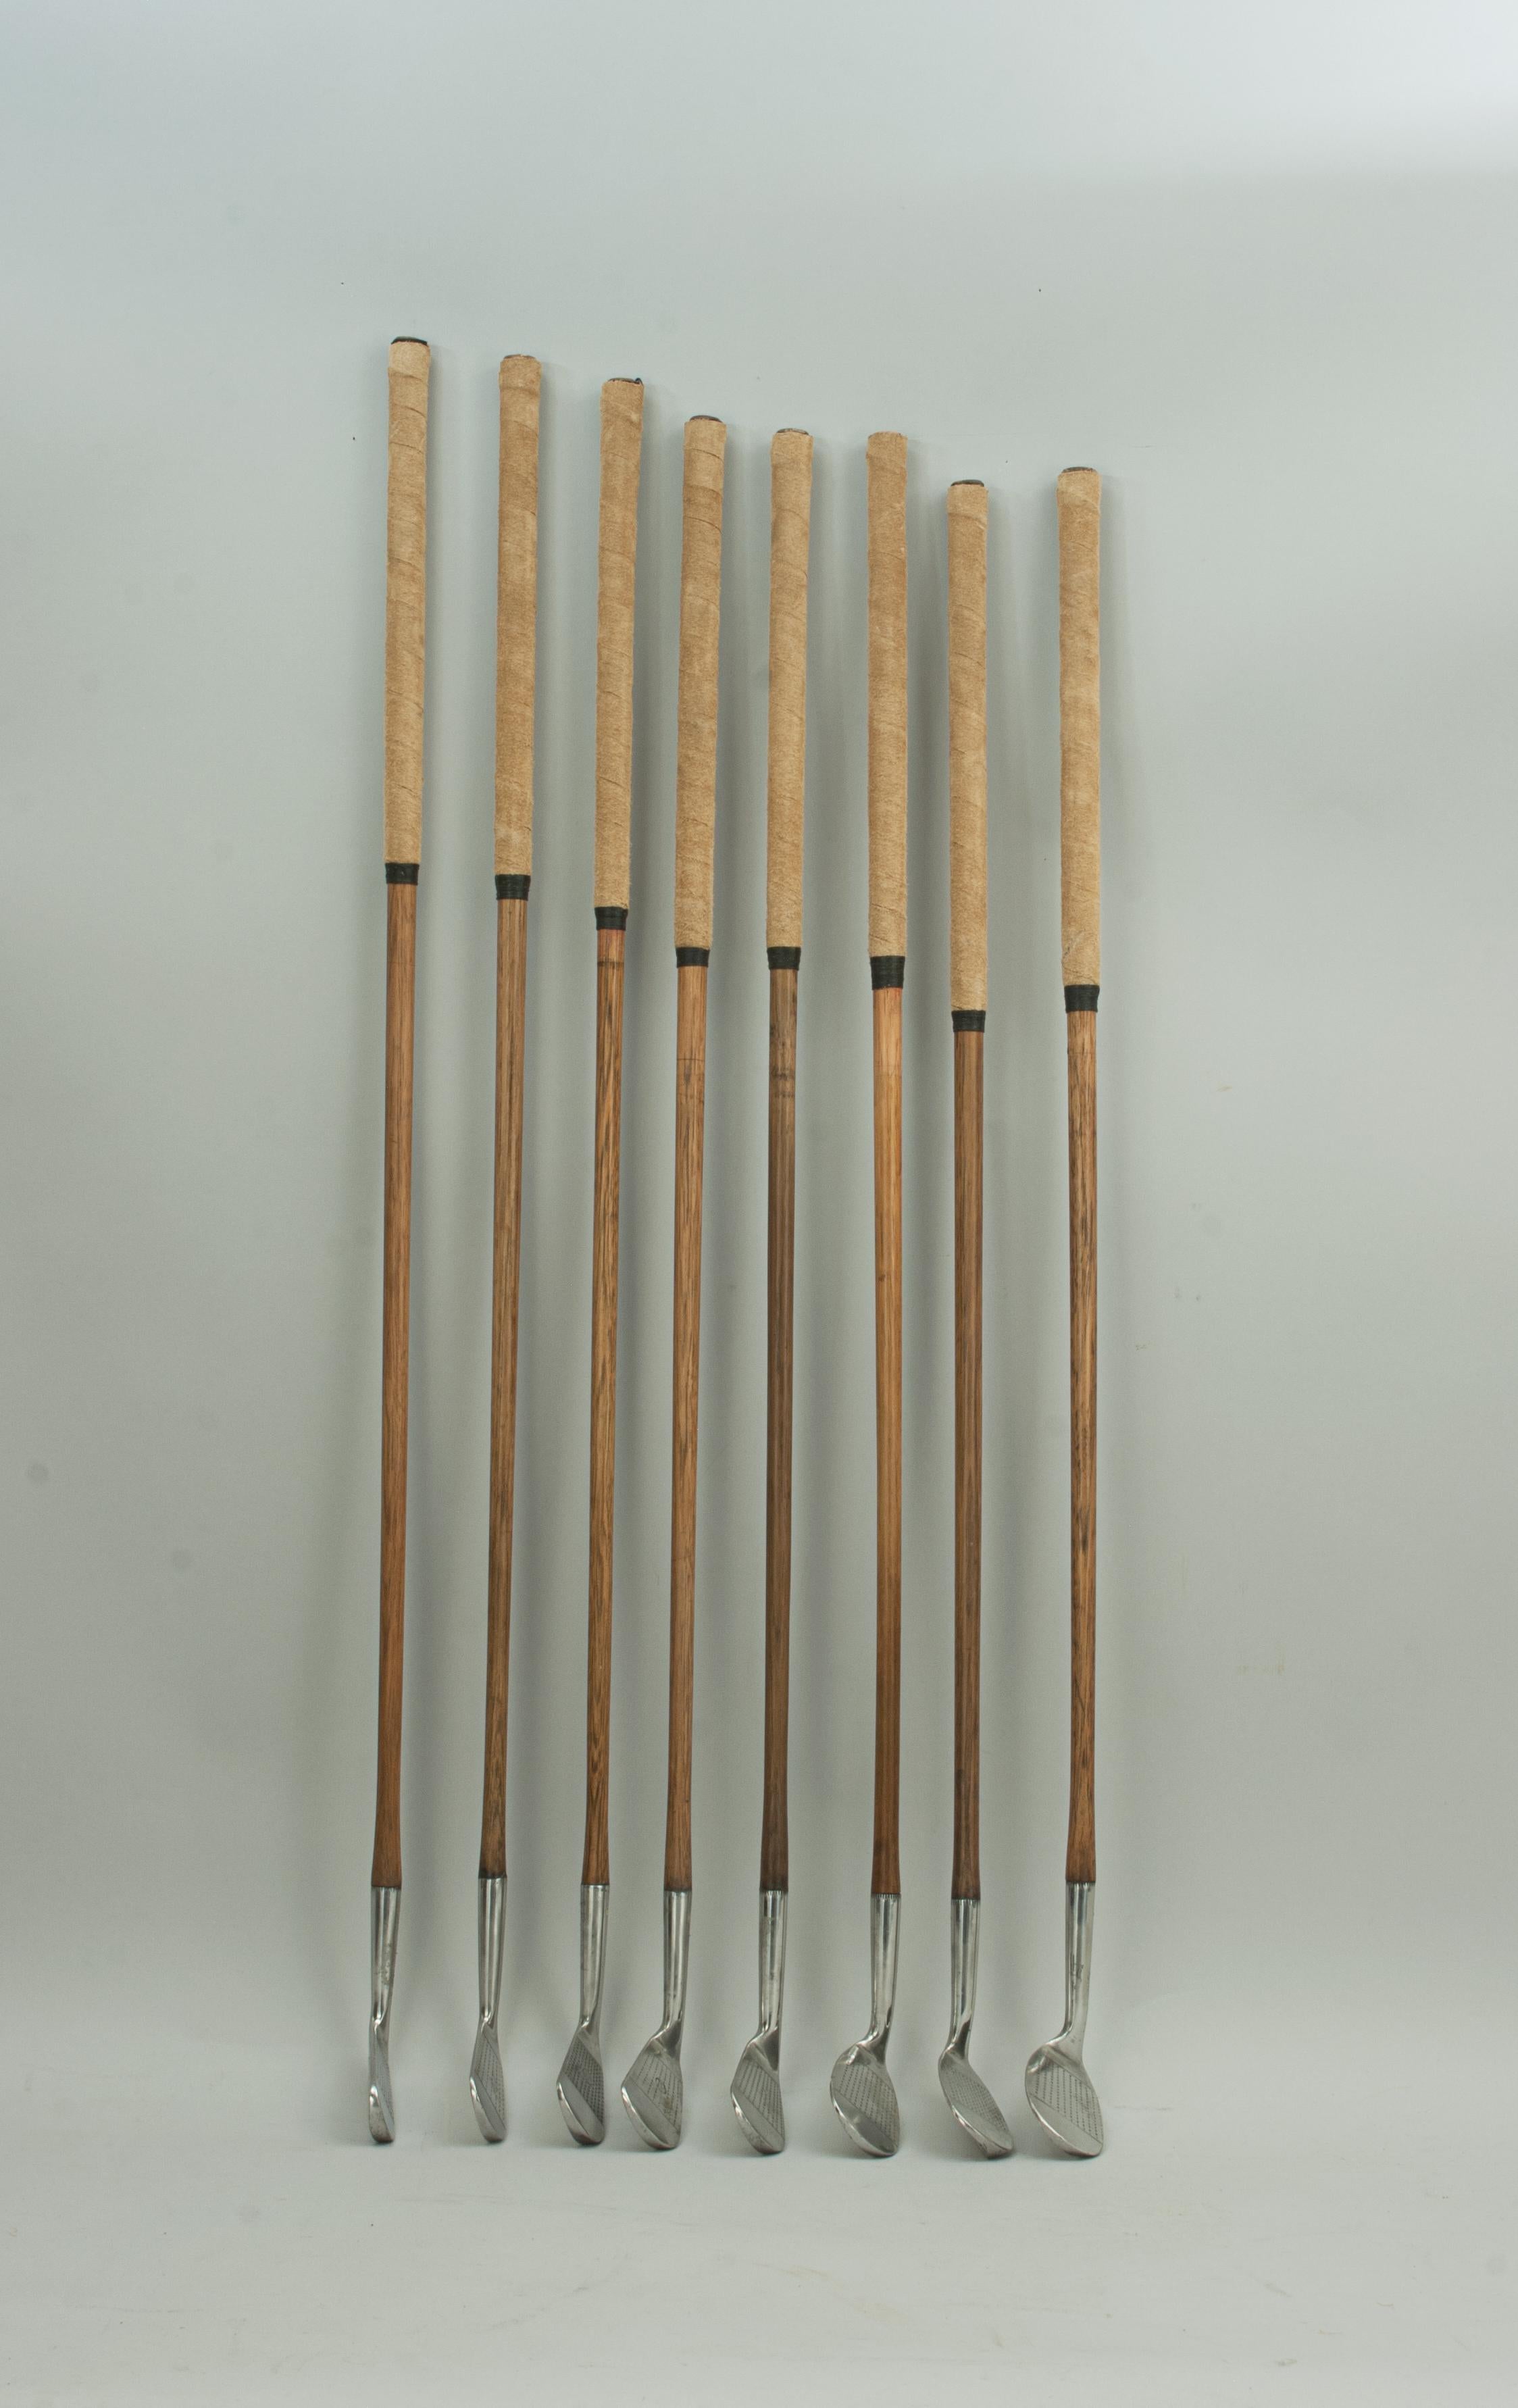 Set of eight playable LB Hickory Golf Clubs.
A very good matched set of eight hickories (hickory shafted golf clubs) retailed by 'LB' of 76 Jermyn Street, London. The set is made up of all irons and include a Cleek, No. 1, 2 & 5, Mashie, two